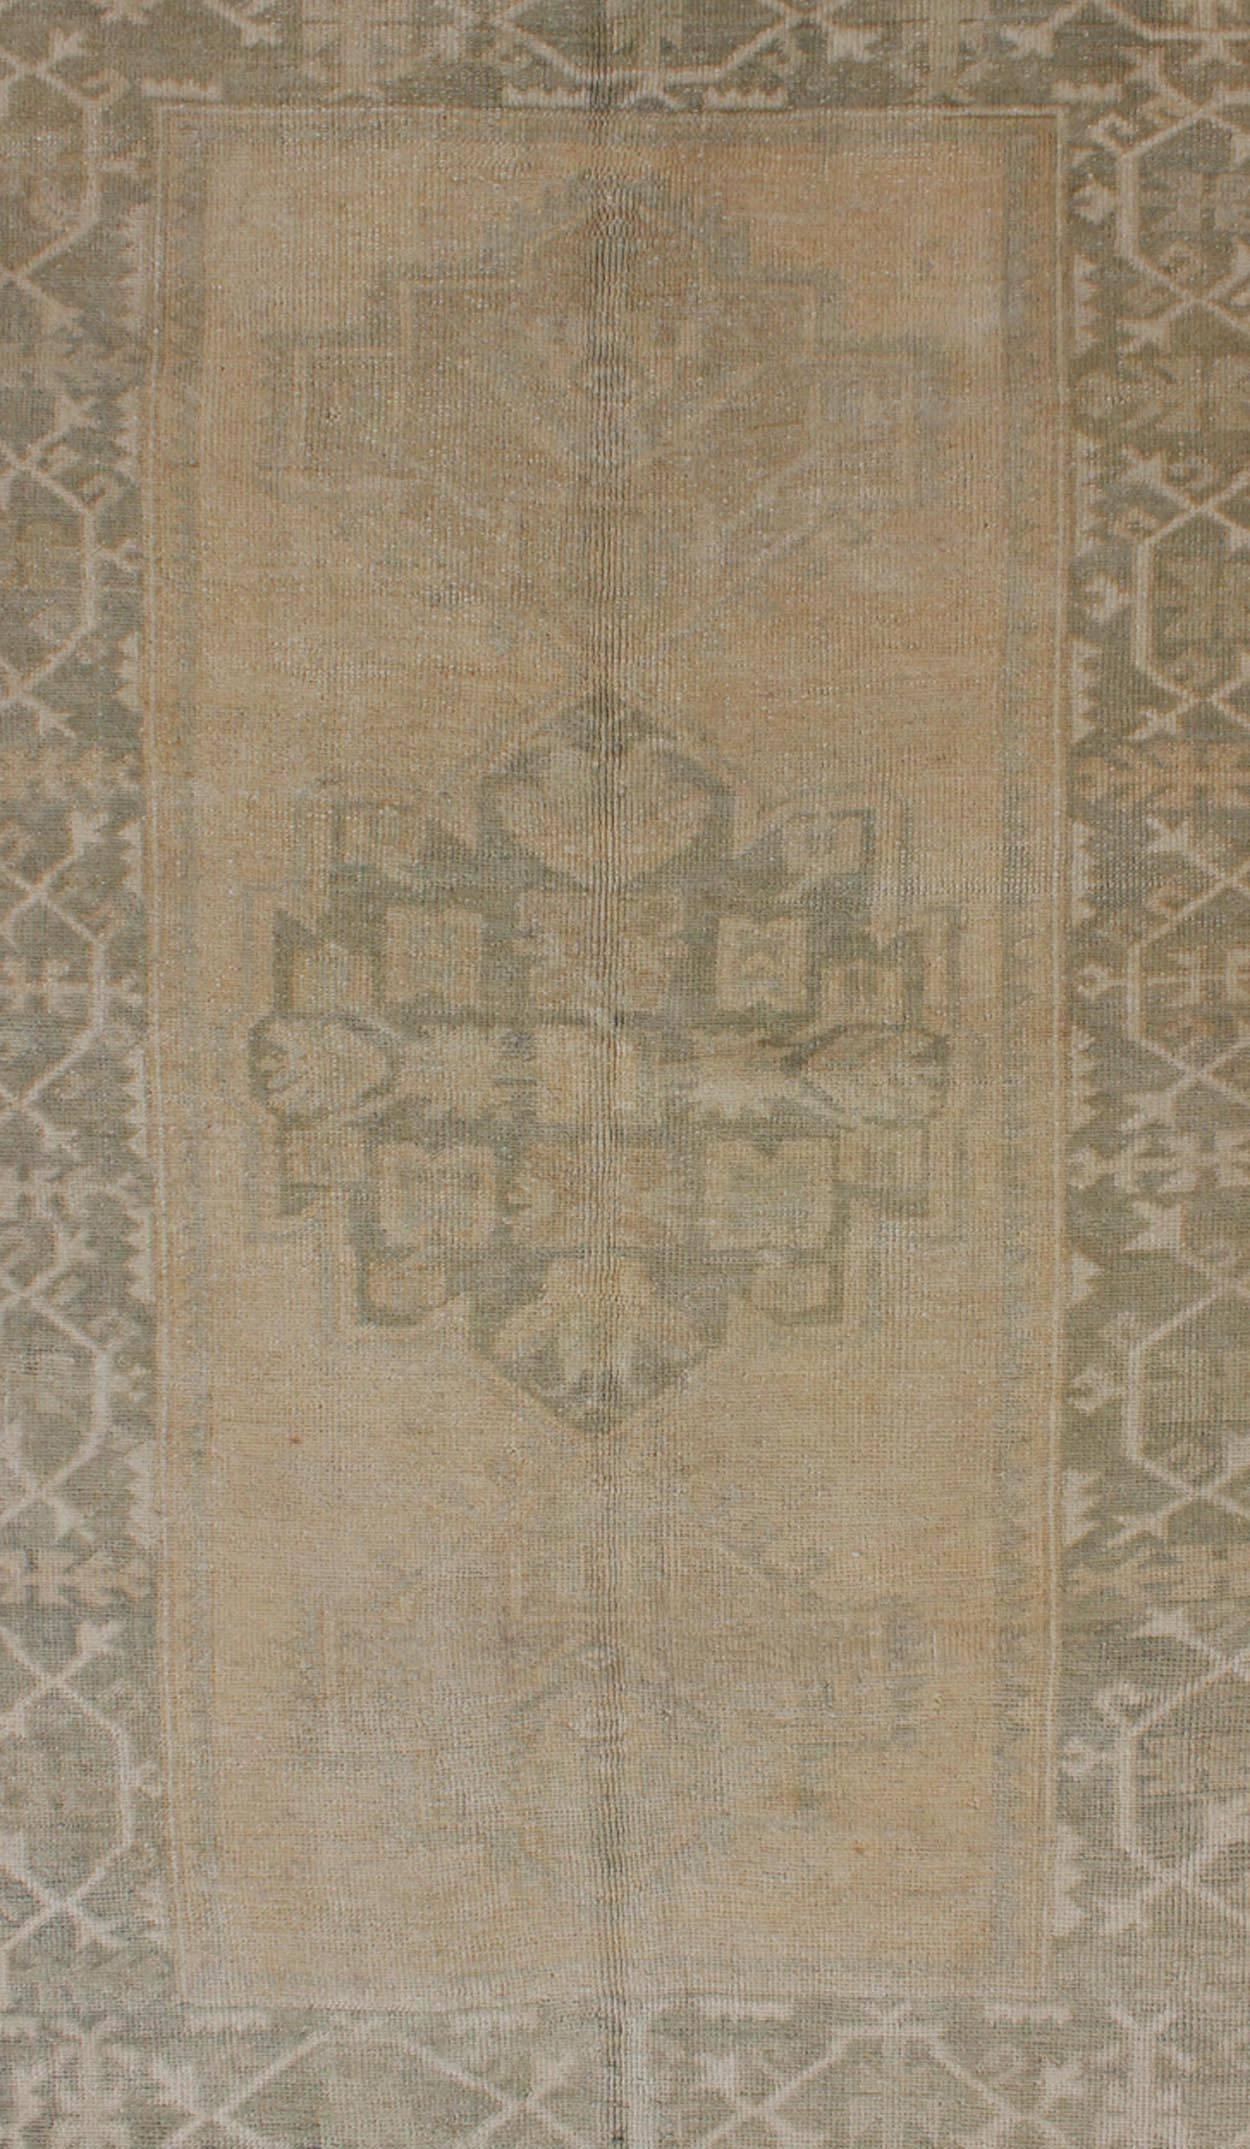 Hand-Knotted Medallion Vintage Turkish Oushak Rug in Taupe, Green and Sand Colors For Sale